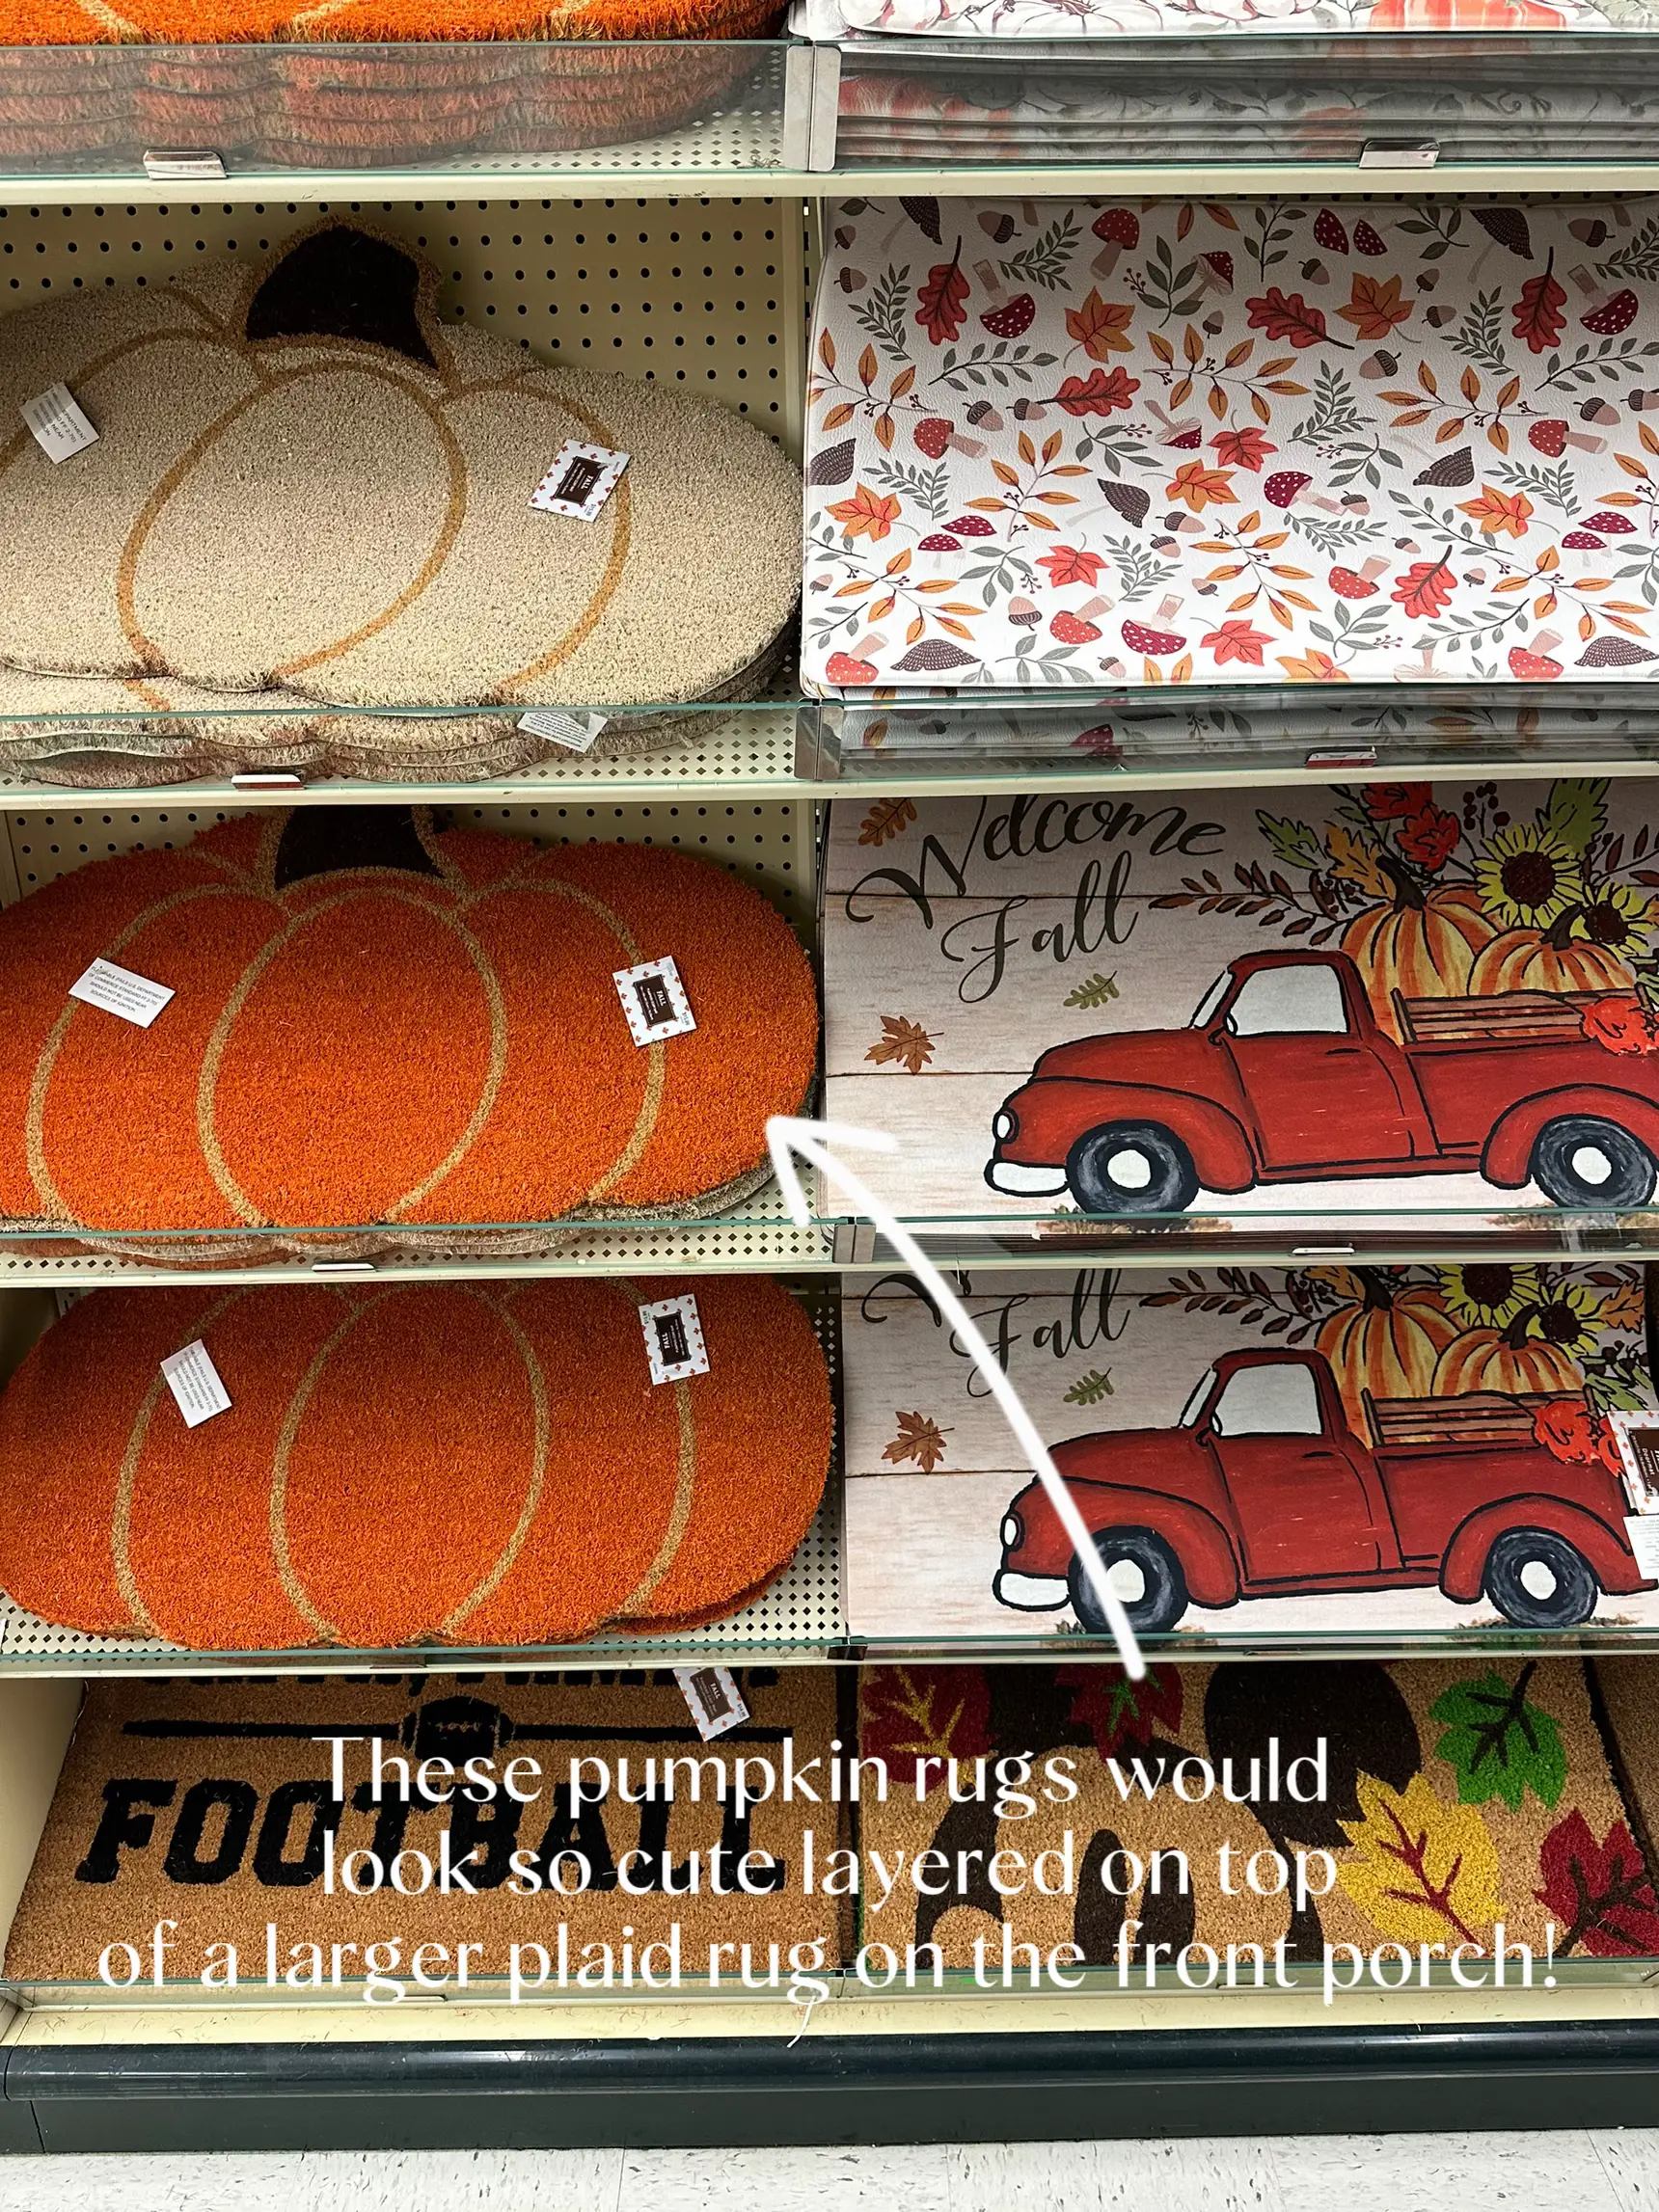 My fave hobby lobby fall finds (40% off!)🎃